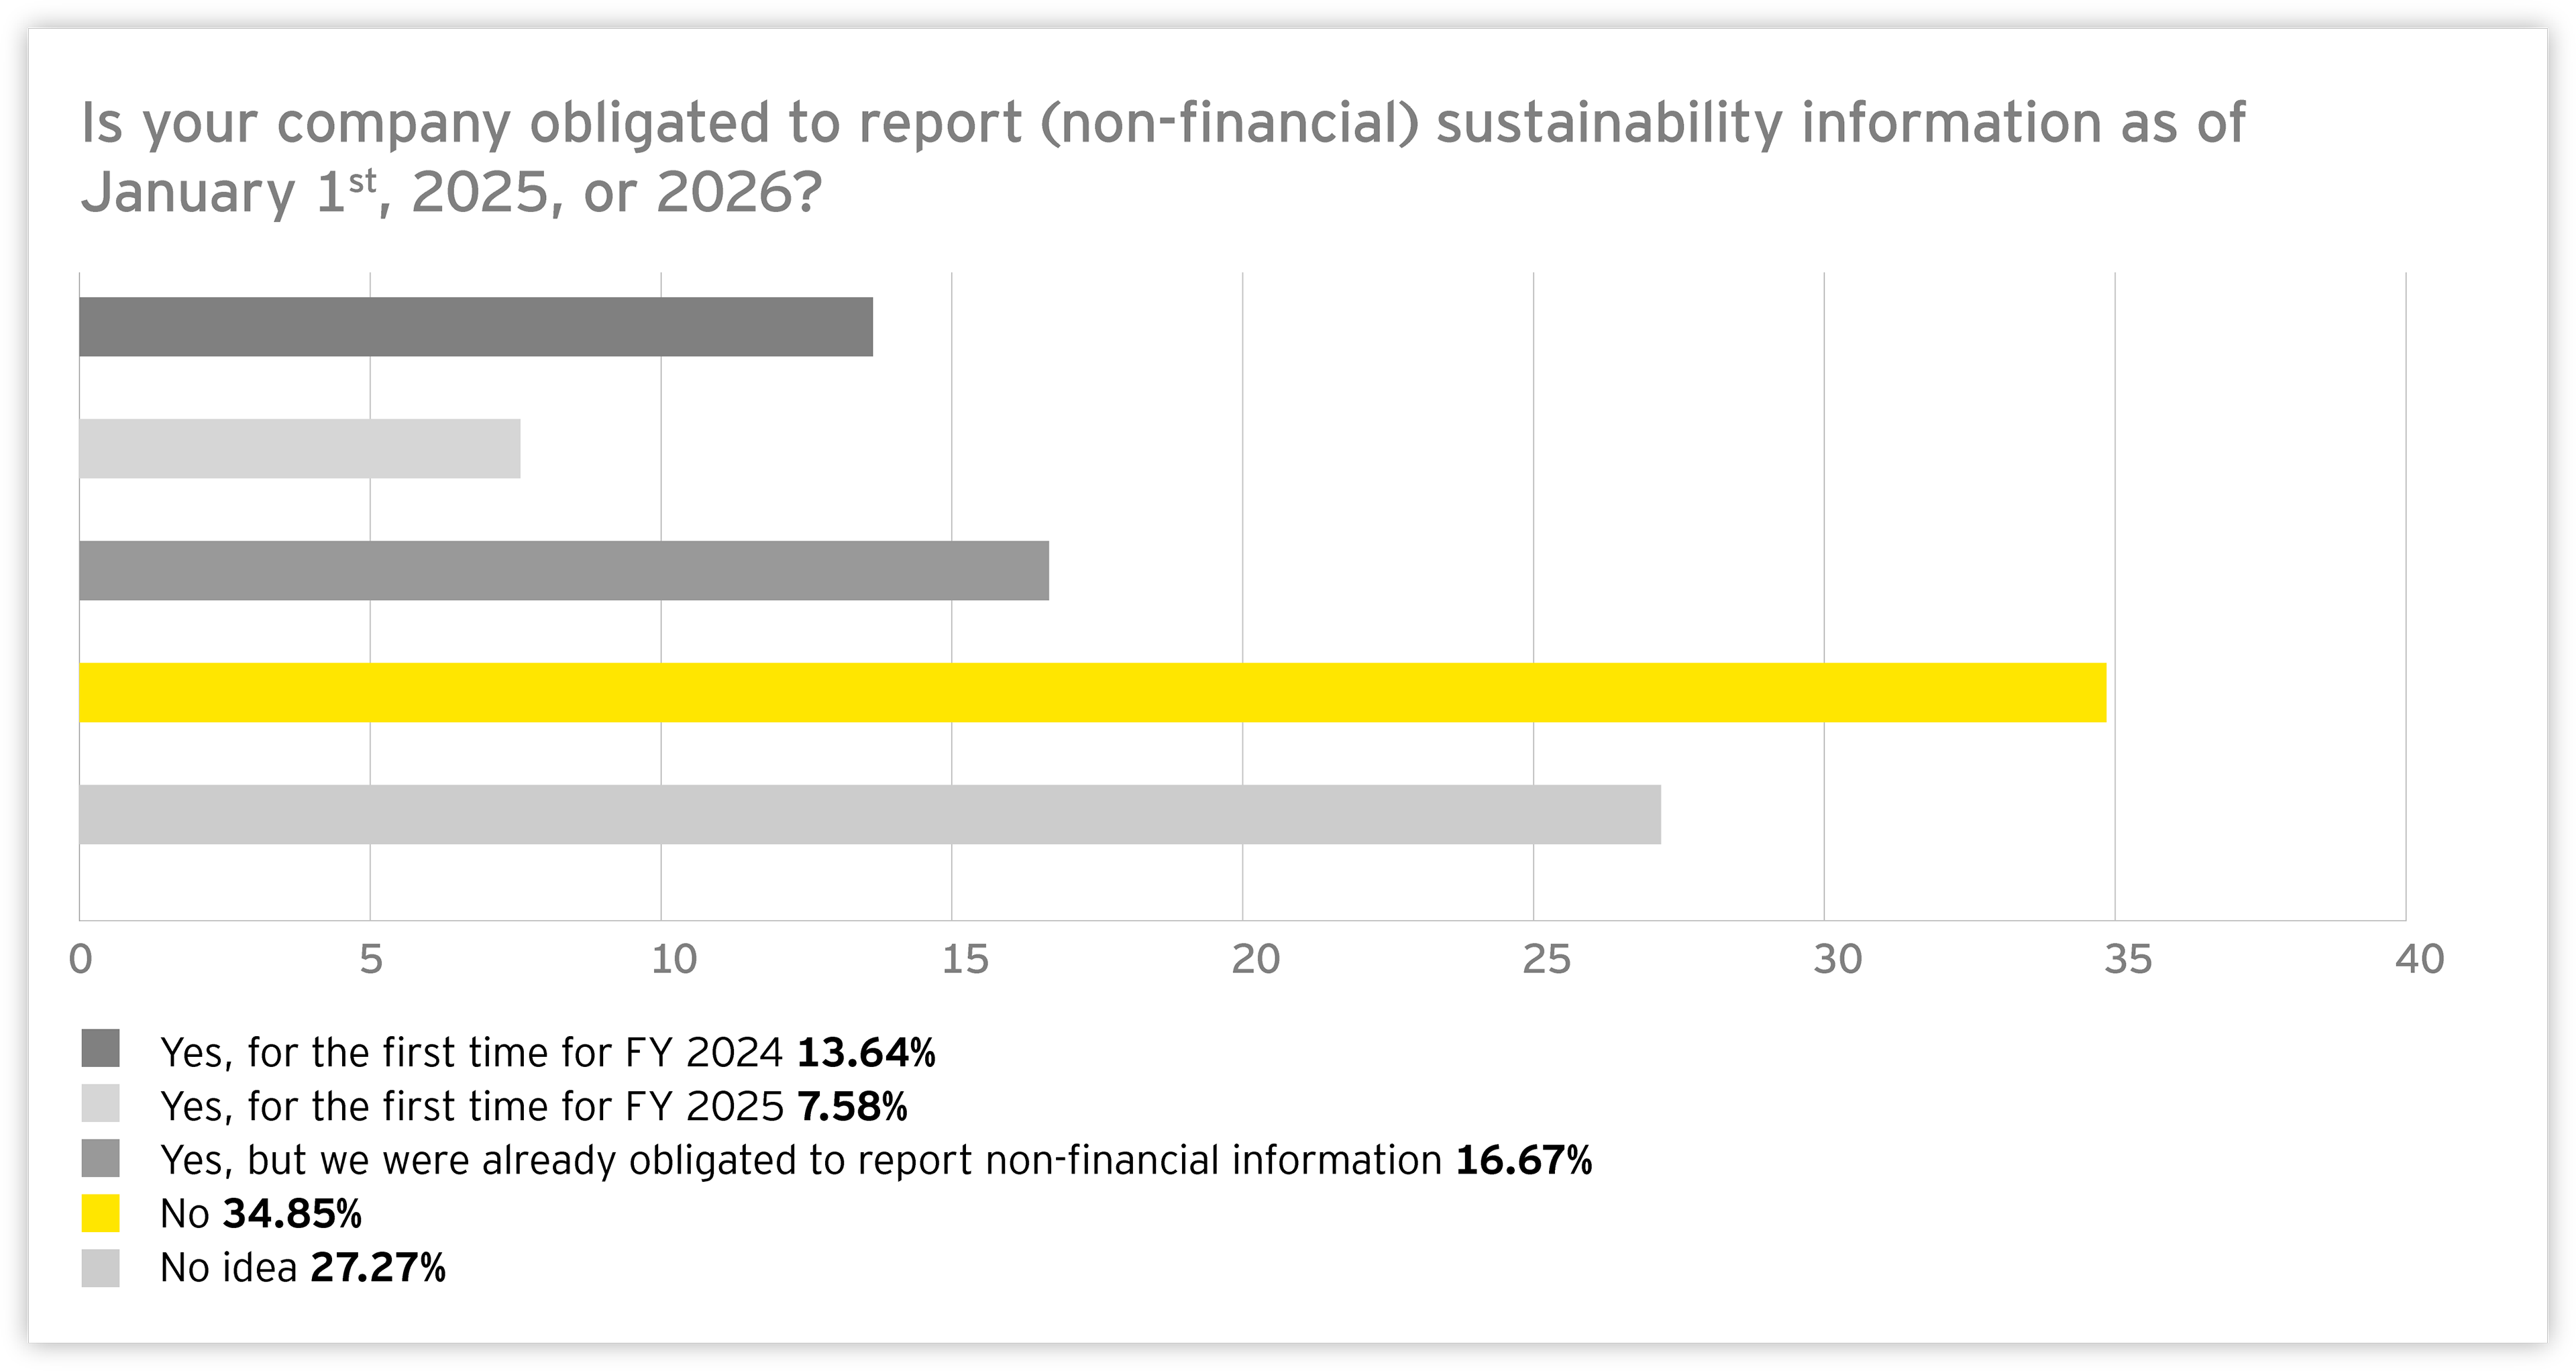 Graph: Is your company obligated to report (non-financial) sustainability information as of January 1st, 2025, or 2026?